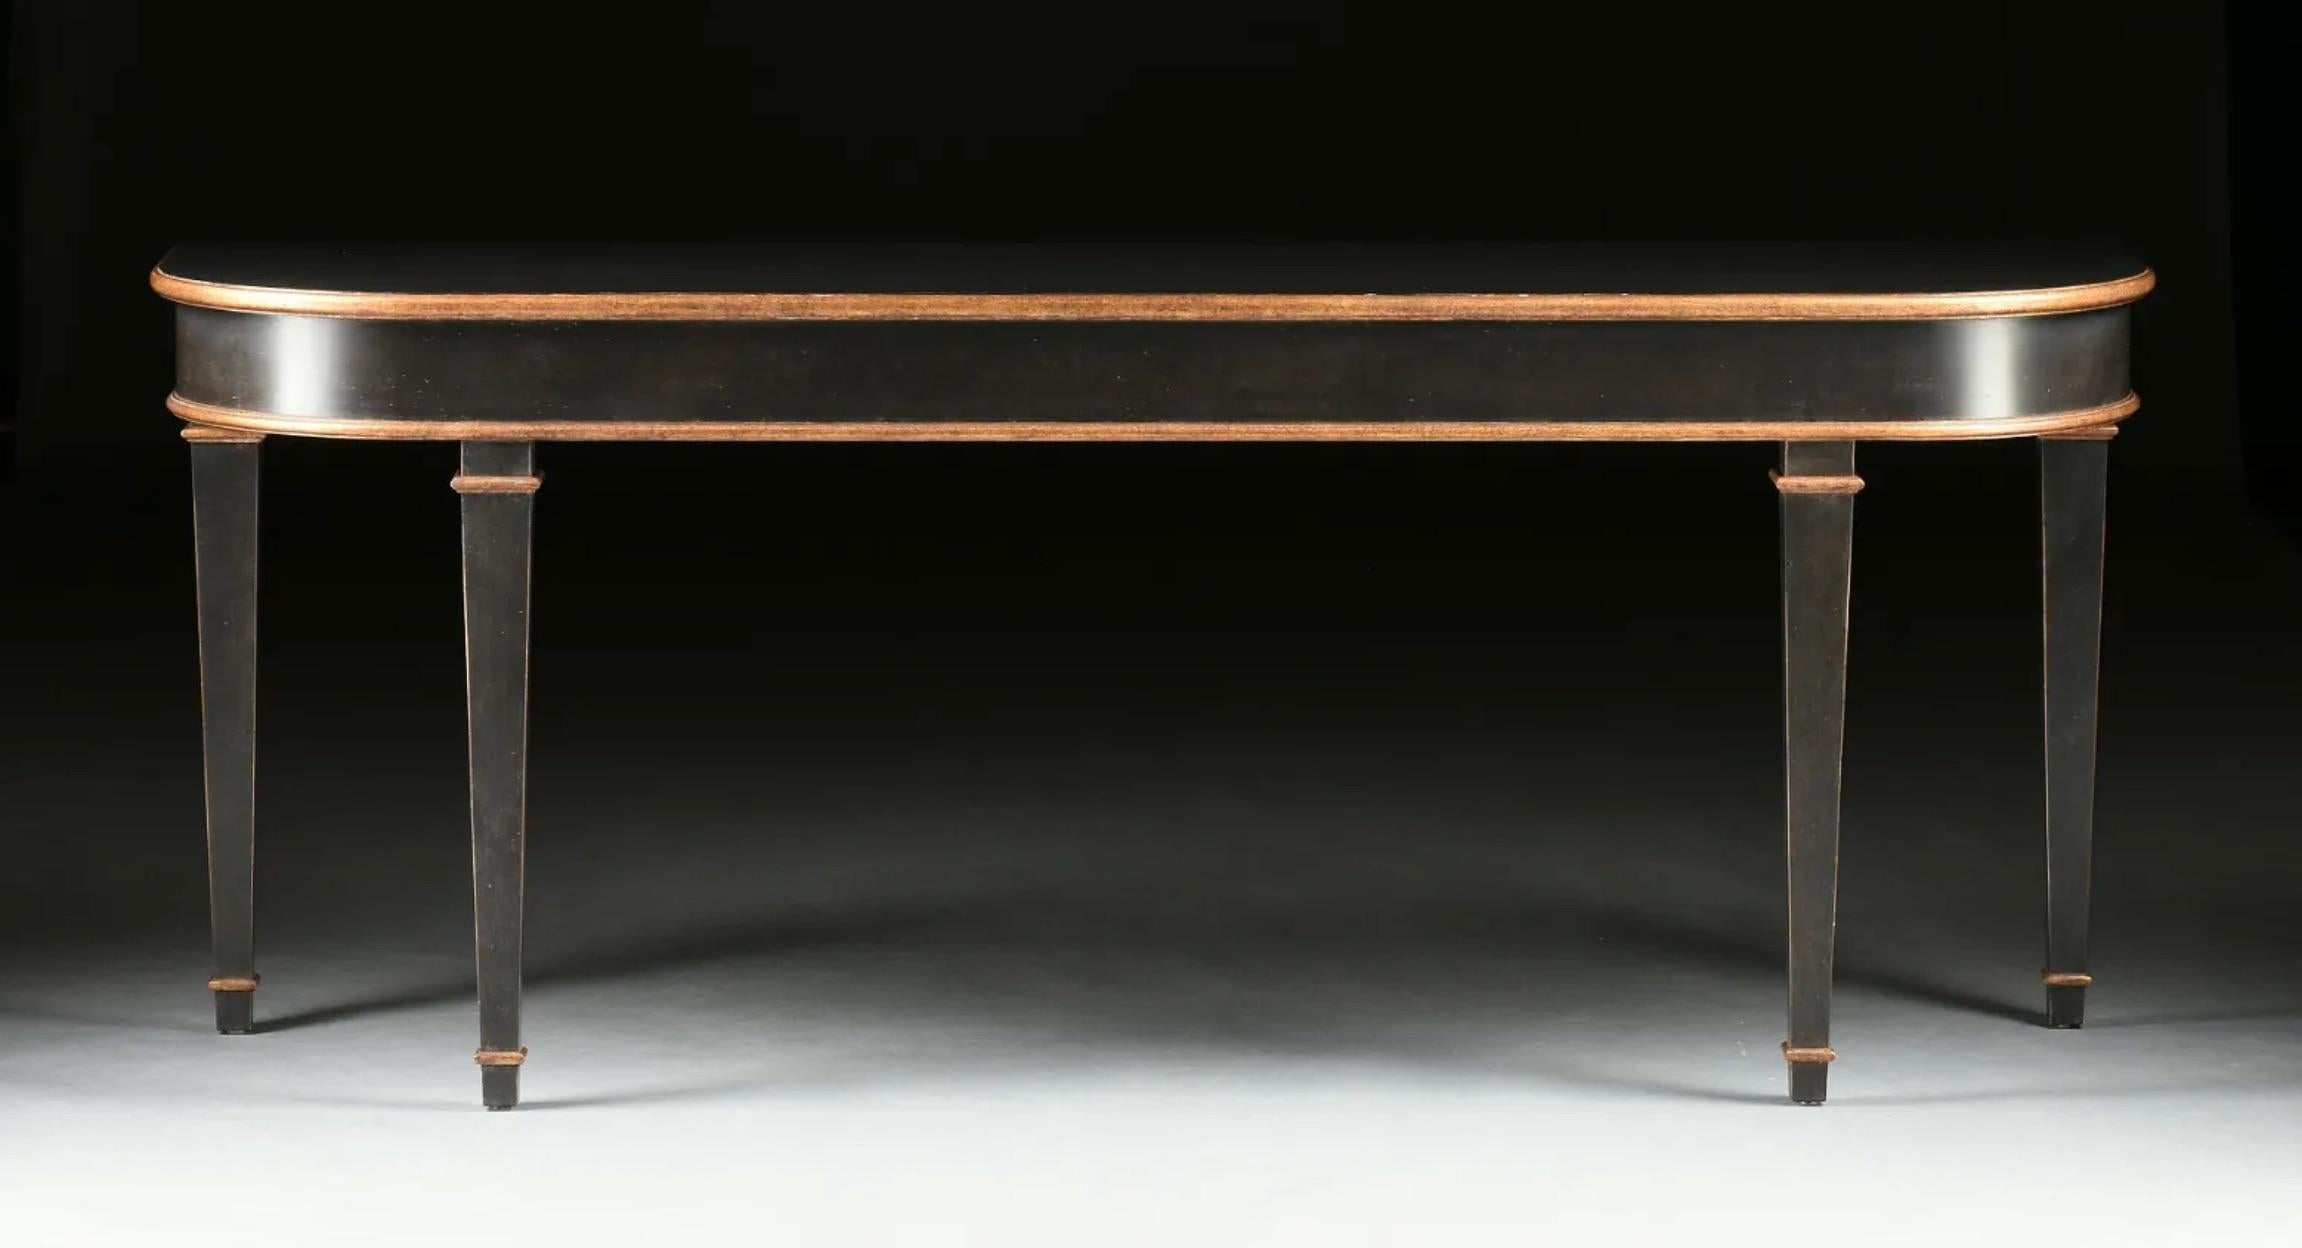 Gilt and Black Lacquer Bespoke Console by Carrocel In Good Condition For Sale In Wichita, KS